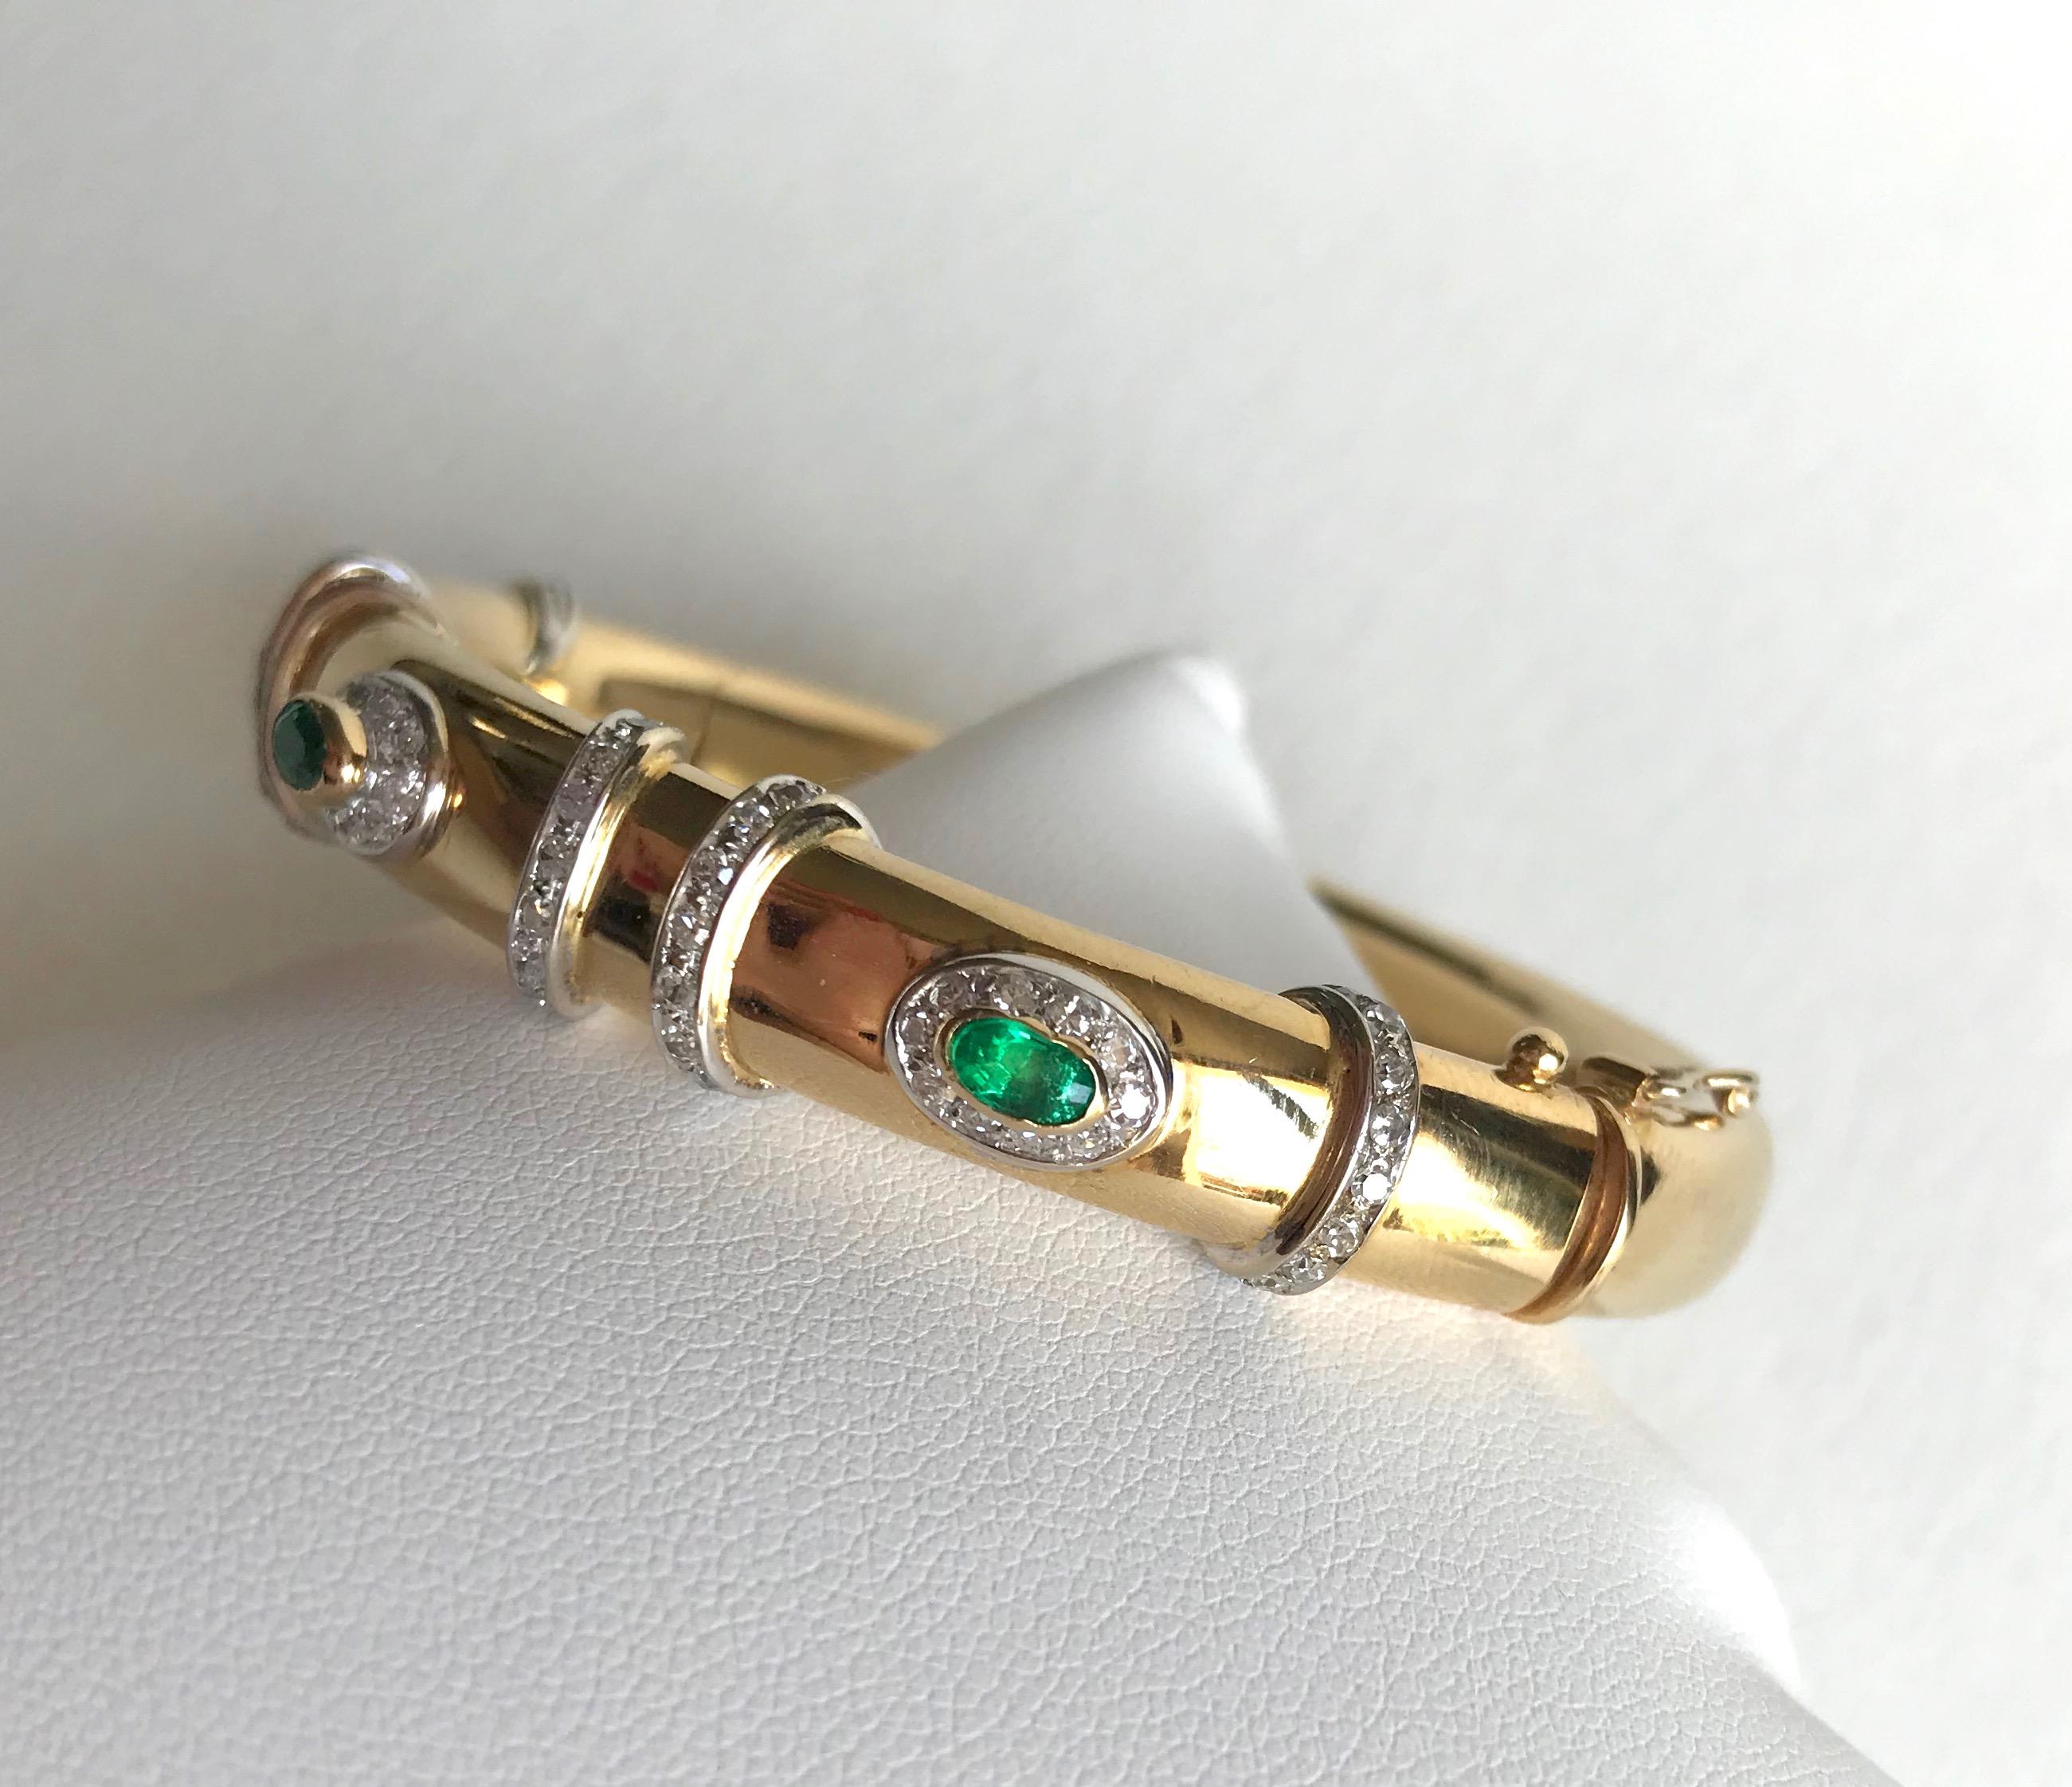 Women's Cartier Rigid Emerald Bracelet 1960 in Yellow and White Gold 18 kt and Diamonds